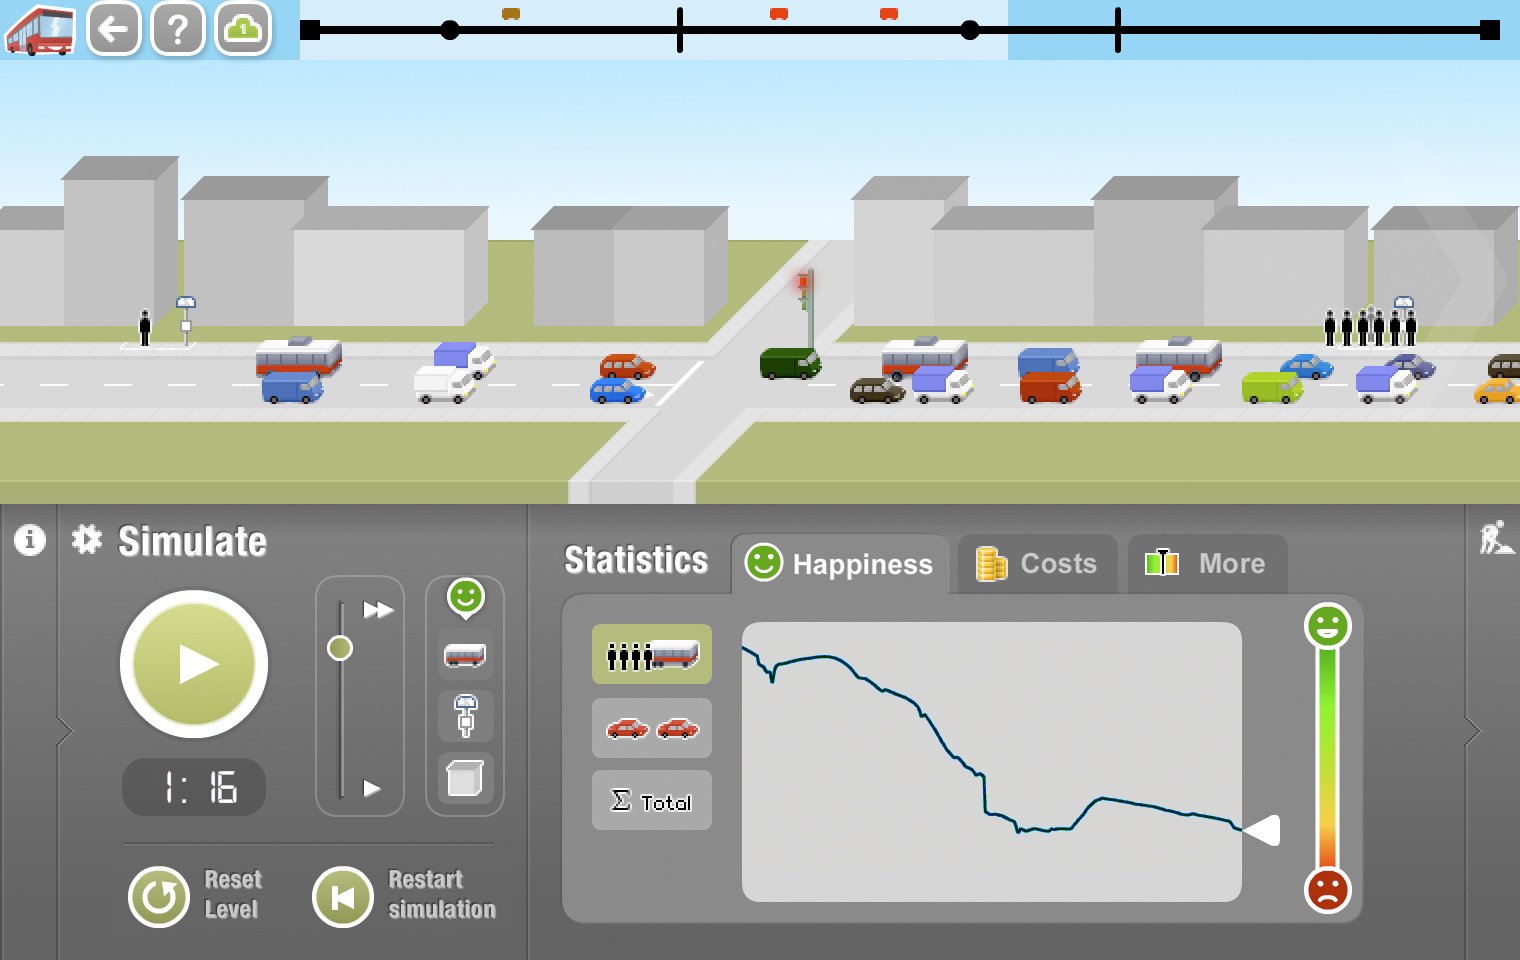 Screen shot from GreenCityStreets Busmeister public transport operations game.